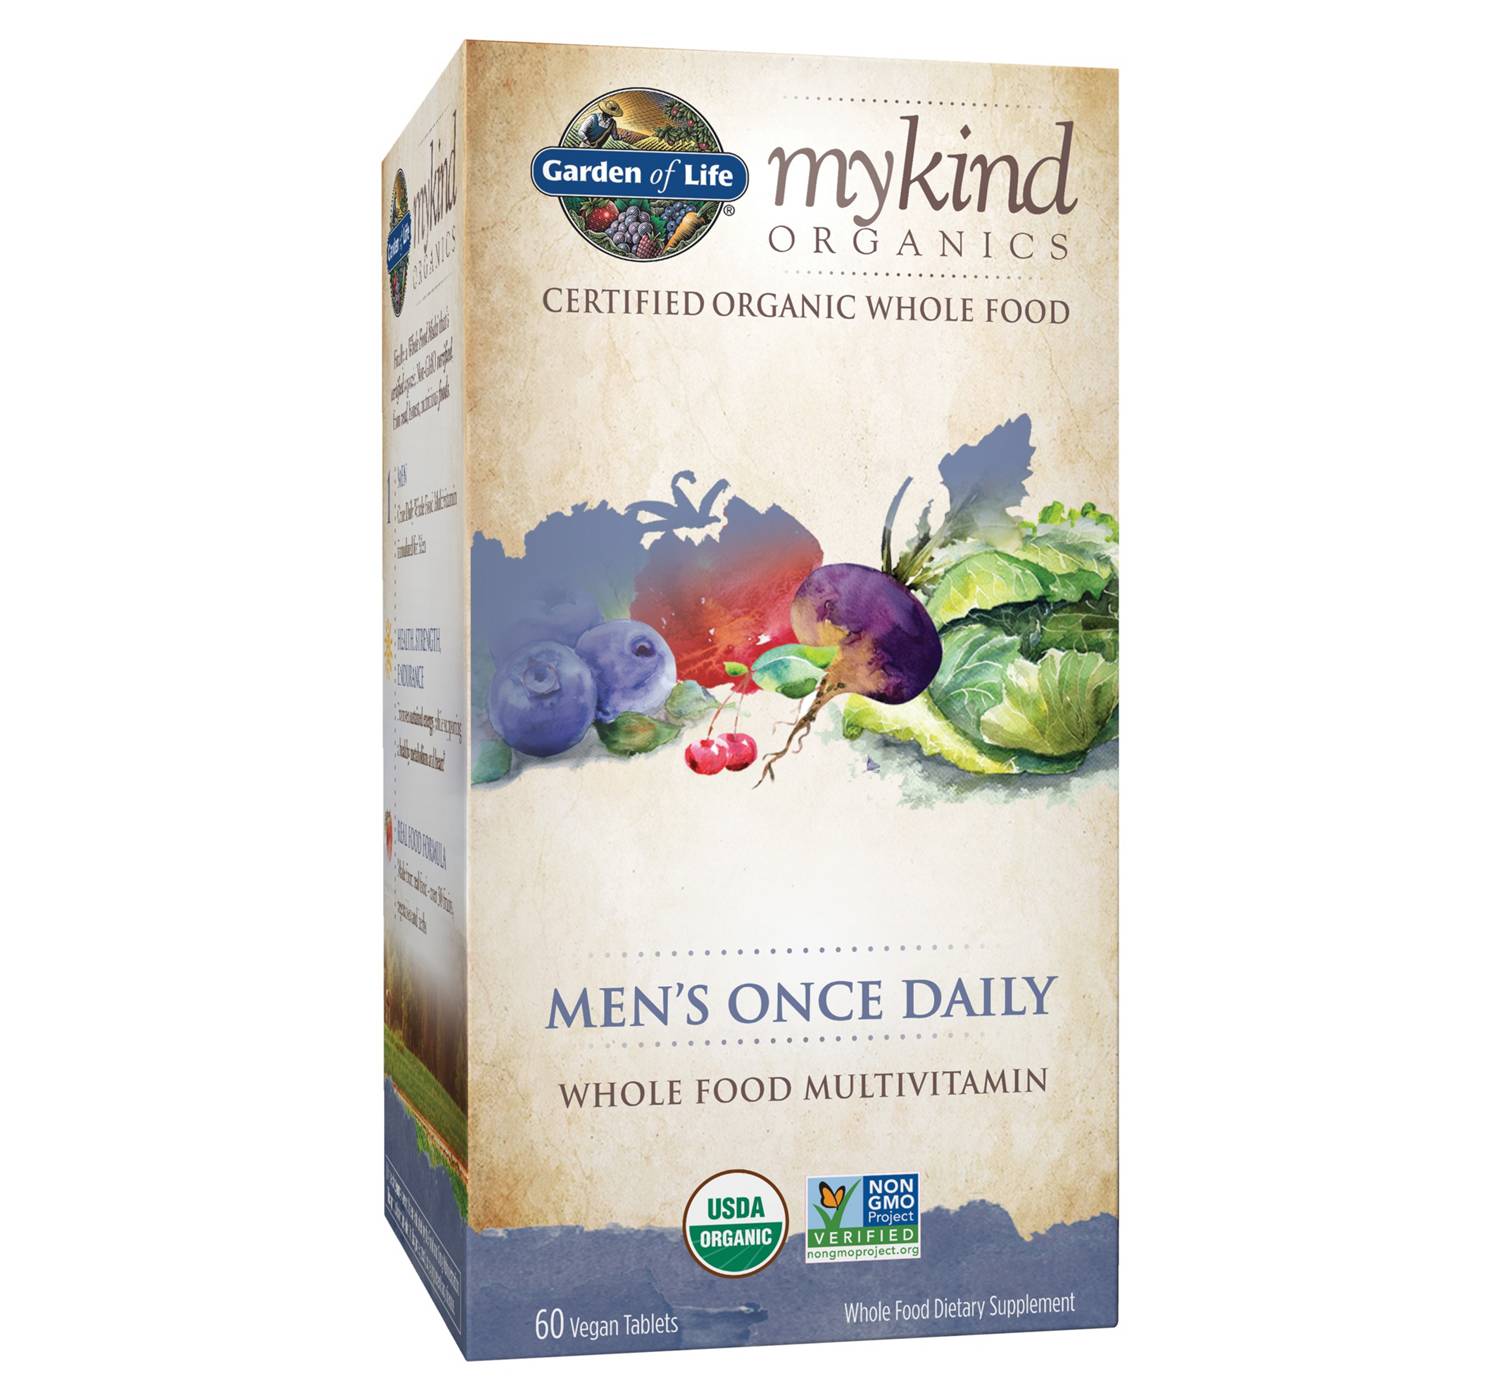 Garden of Life mykind Organics Men's Once Daily Multivitamin Tablets; image 1 of 2